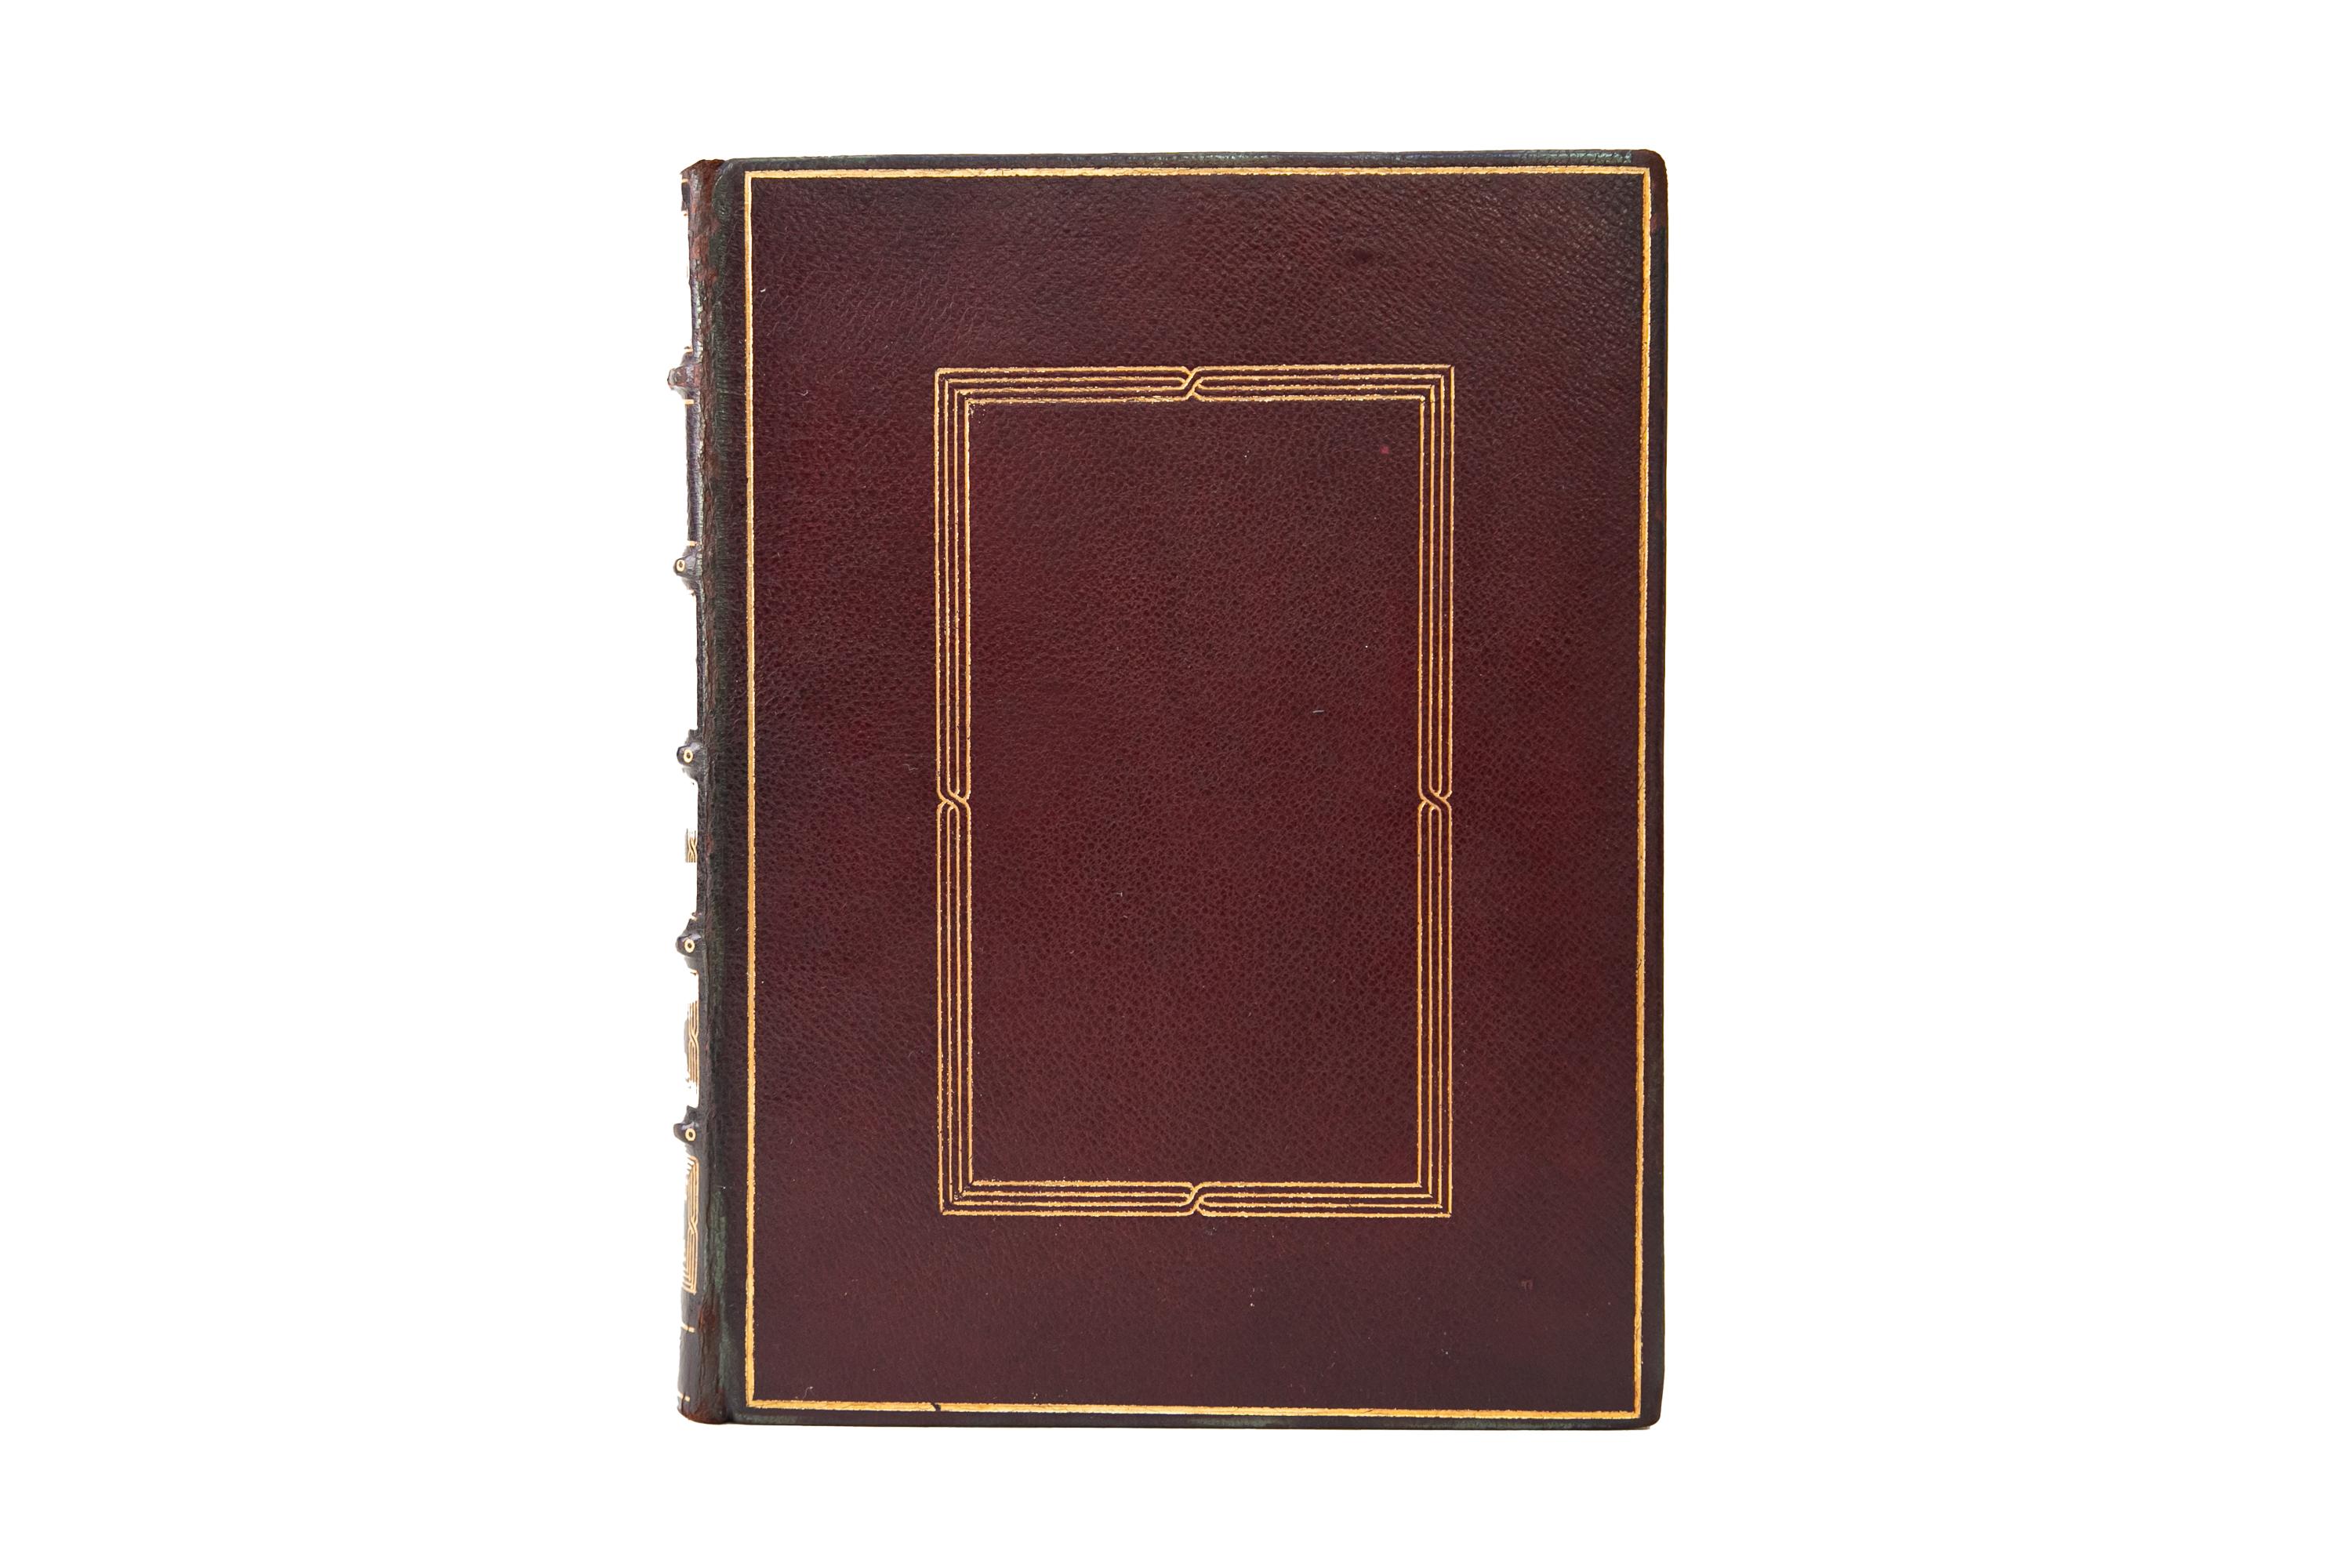 1 Volume. Percy Bysshe Shelley, Dramatic Poems. Bound in full wine morocco with the covers displaying a gilt-tooled border. Raised band spine with gilt-tooled detailing. Top edge gilt, gilt-tooled doublures, and marbled endpapers. Arranged in